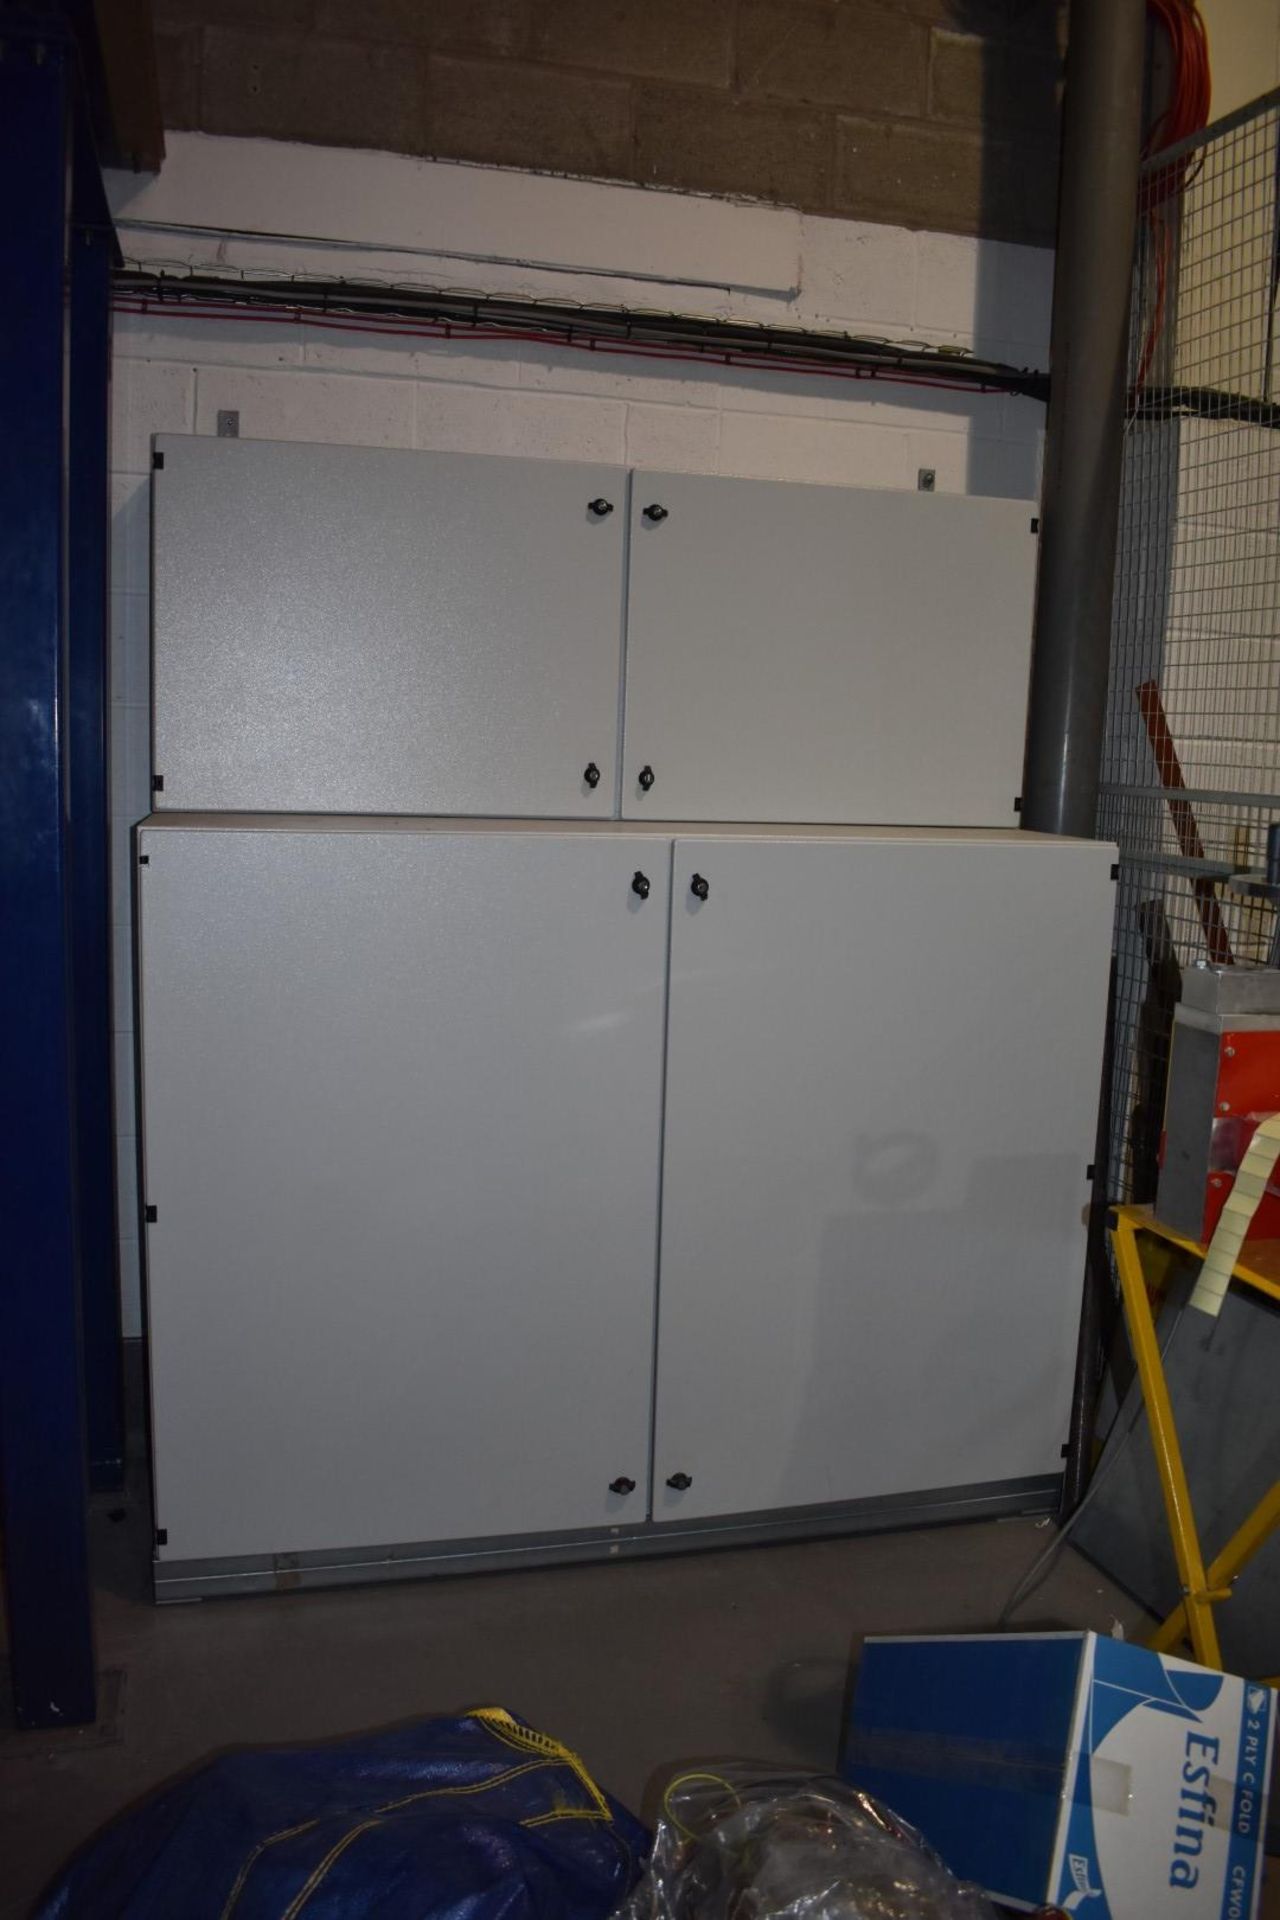 1 x Large Workshop Storage Cabinet Grey Coated Metal Cabinet With Locks and Internal Shelves - Image 4 of 6